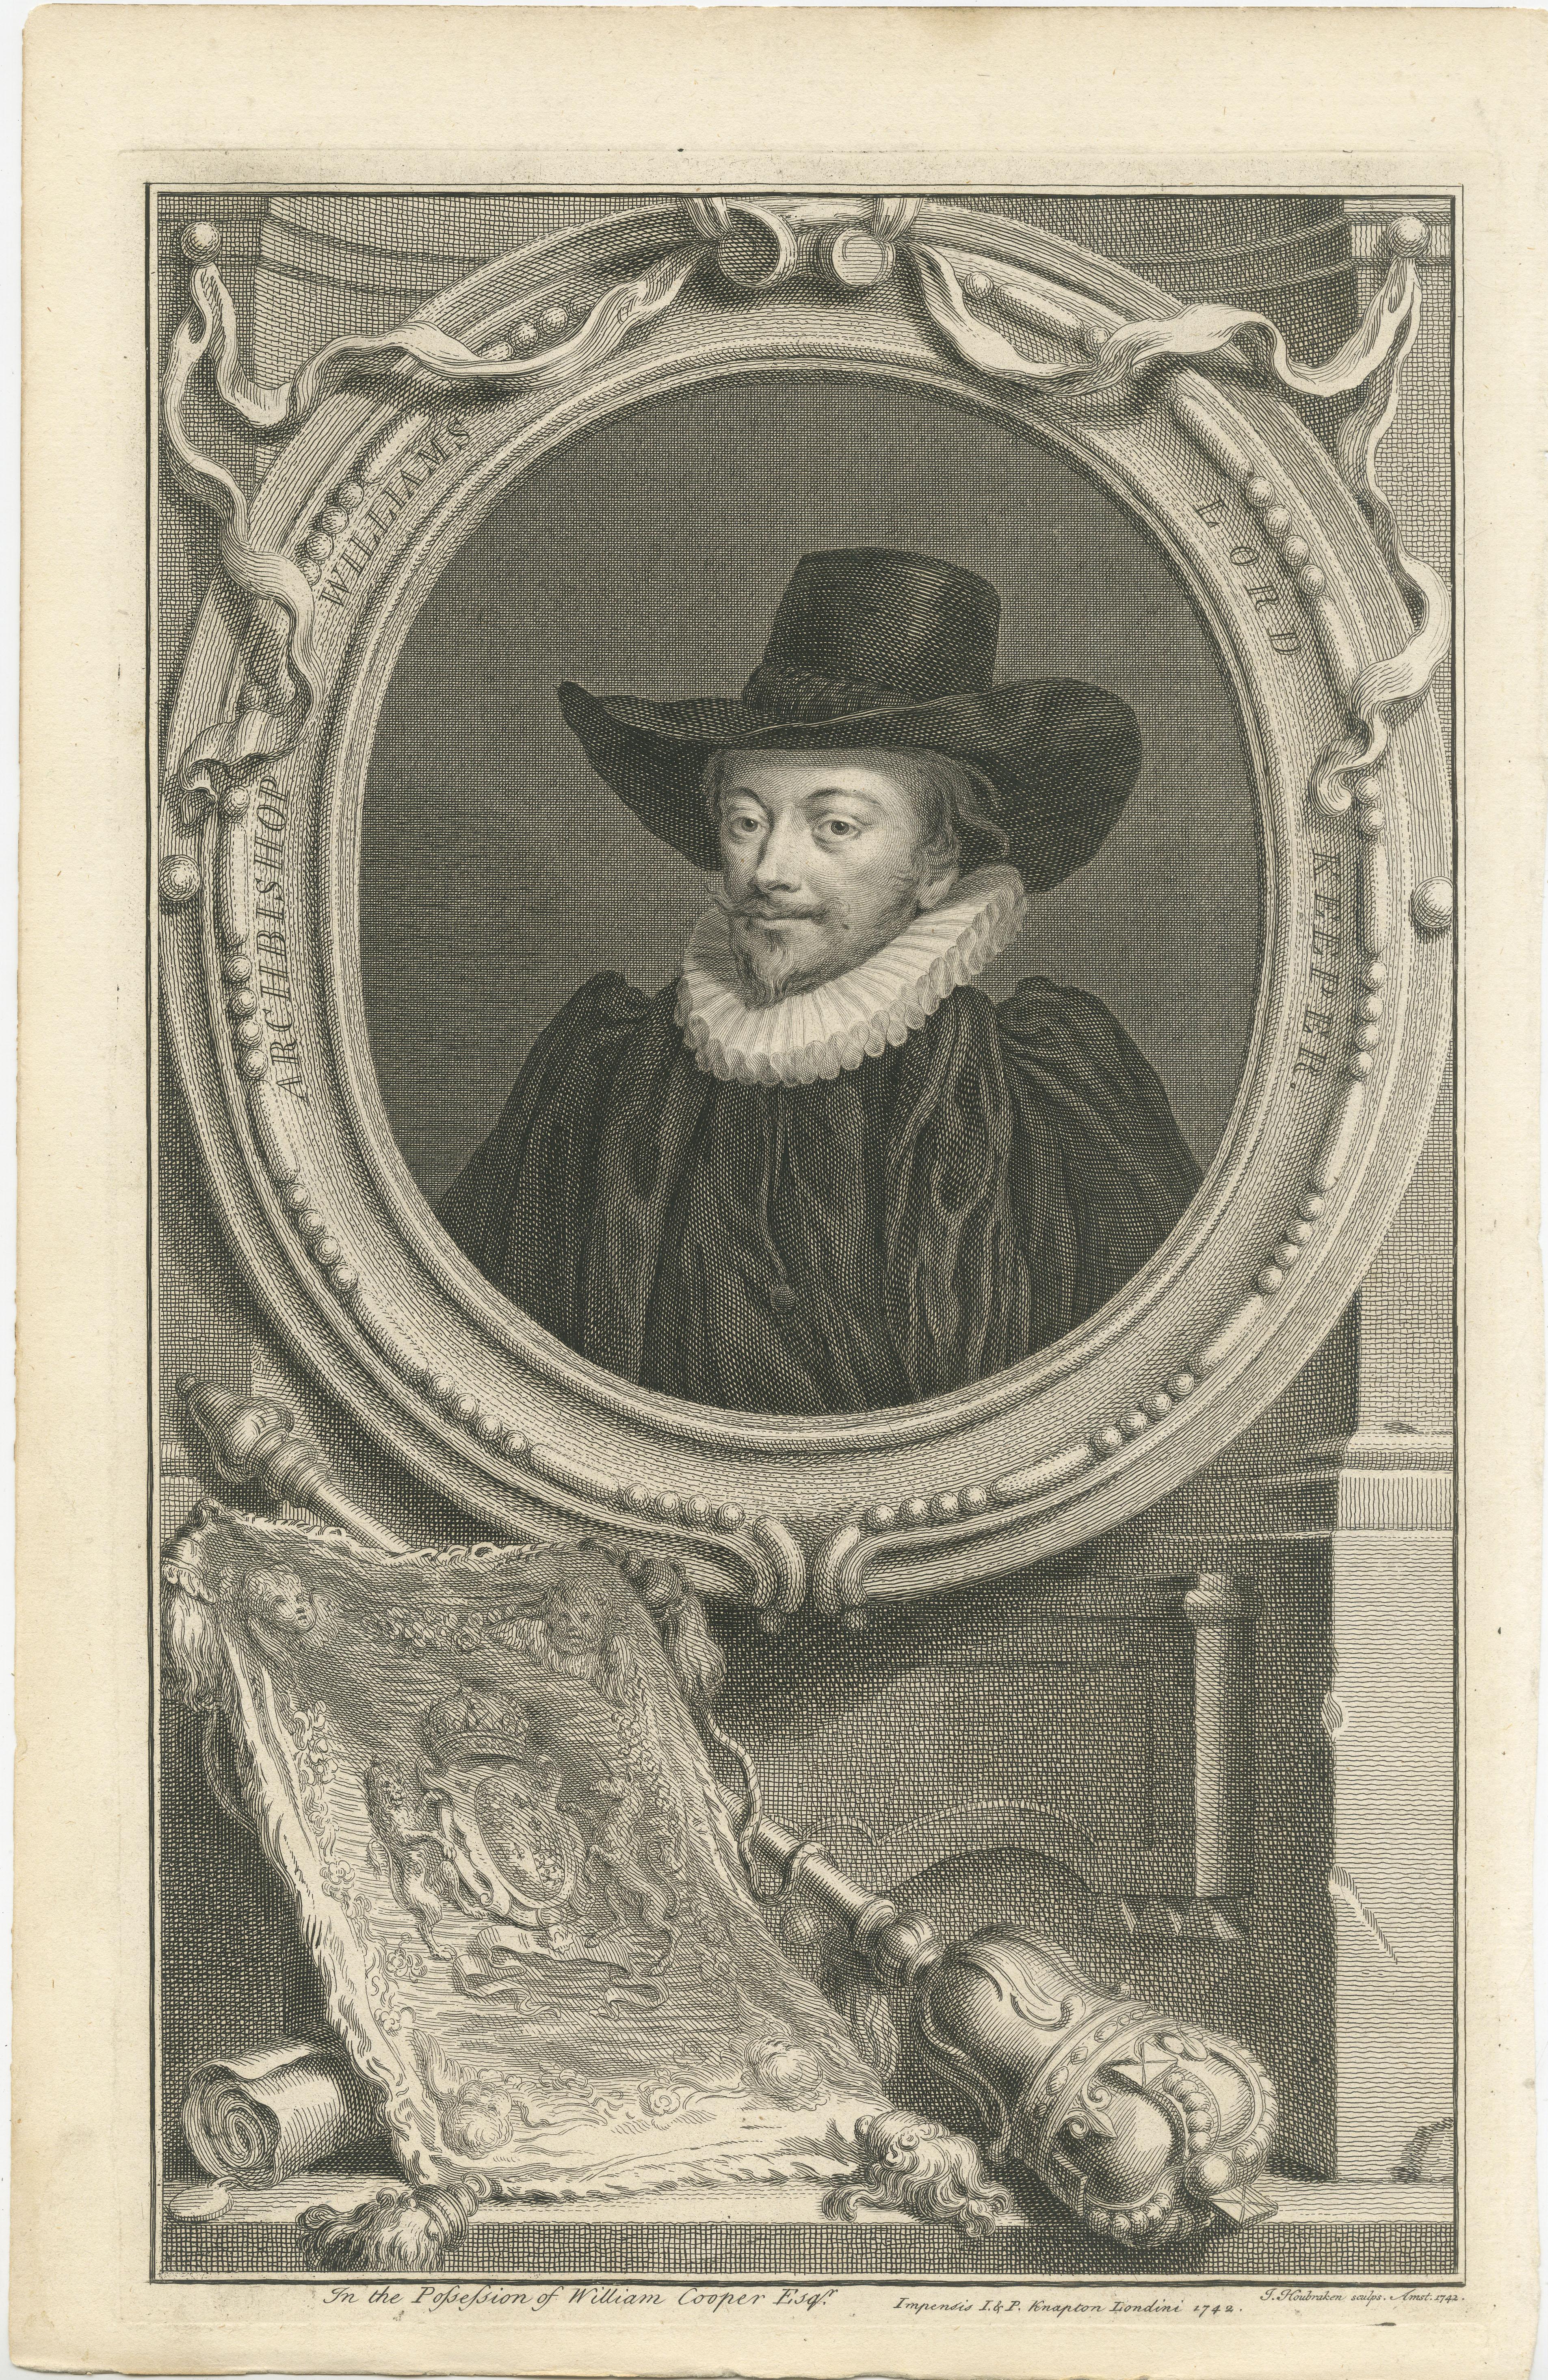 Antique portrait titled 'Archbishop Williams, Lord Keeper'. Old print of Archbishop Williams, Lord Keeper.

This print originates from Thomas Birch's 'The Heads of Illustrious Persons of Great Britain'. The portraits featured in the series, which